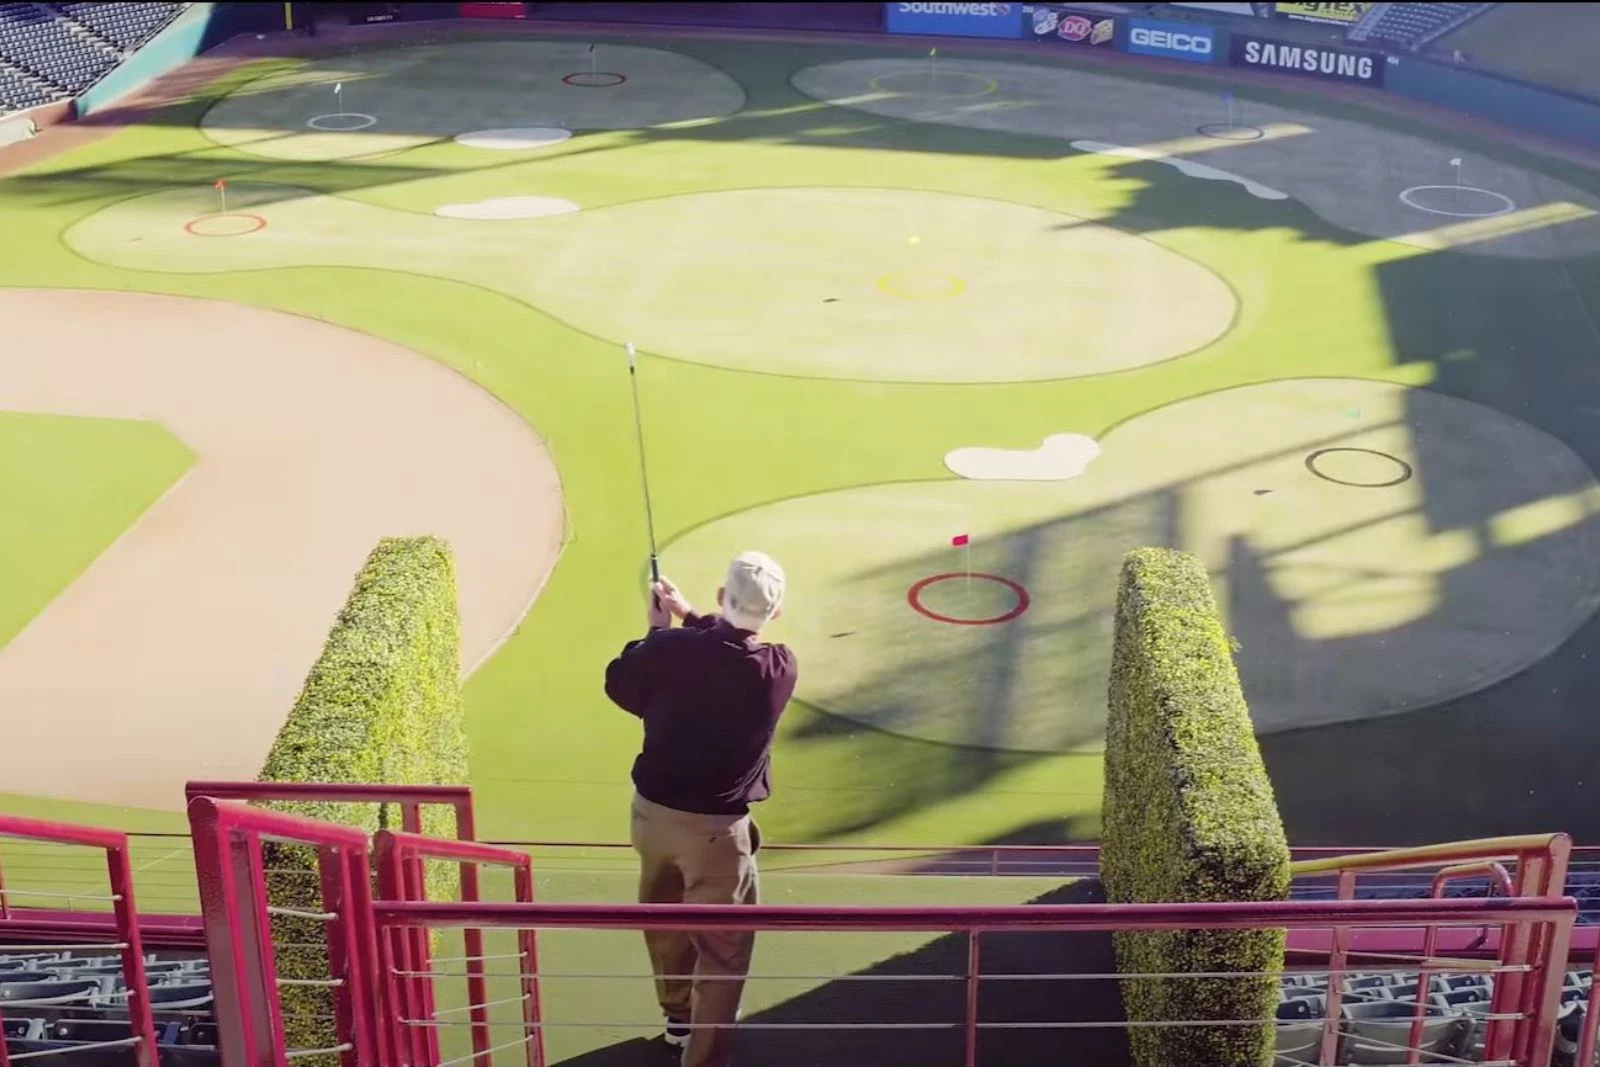 Stadiumlinks Golf is coming to Globe Life Field this October - City of  Arlington